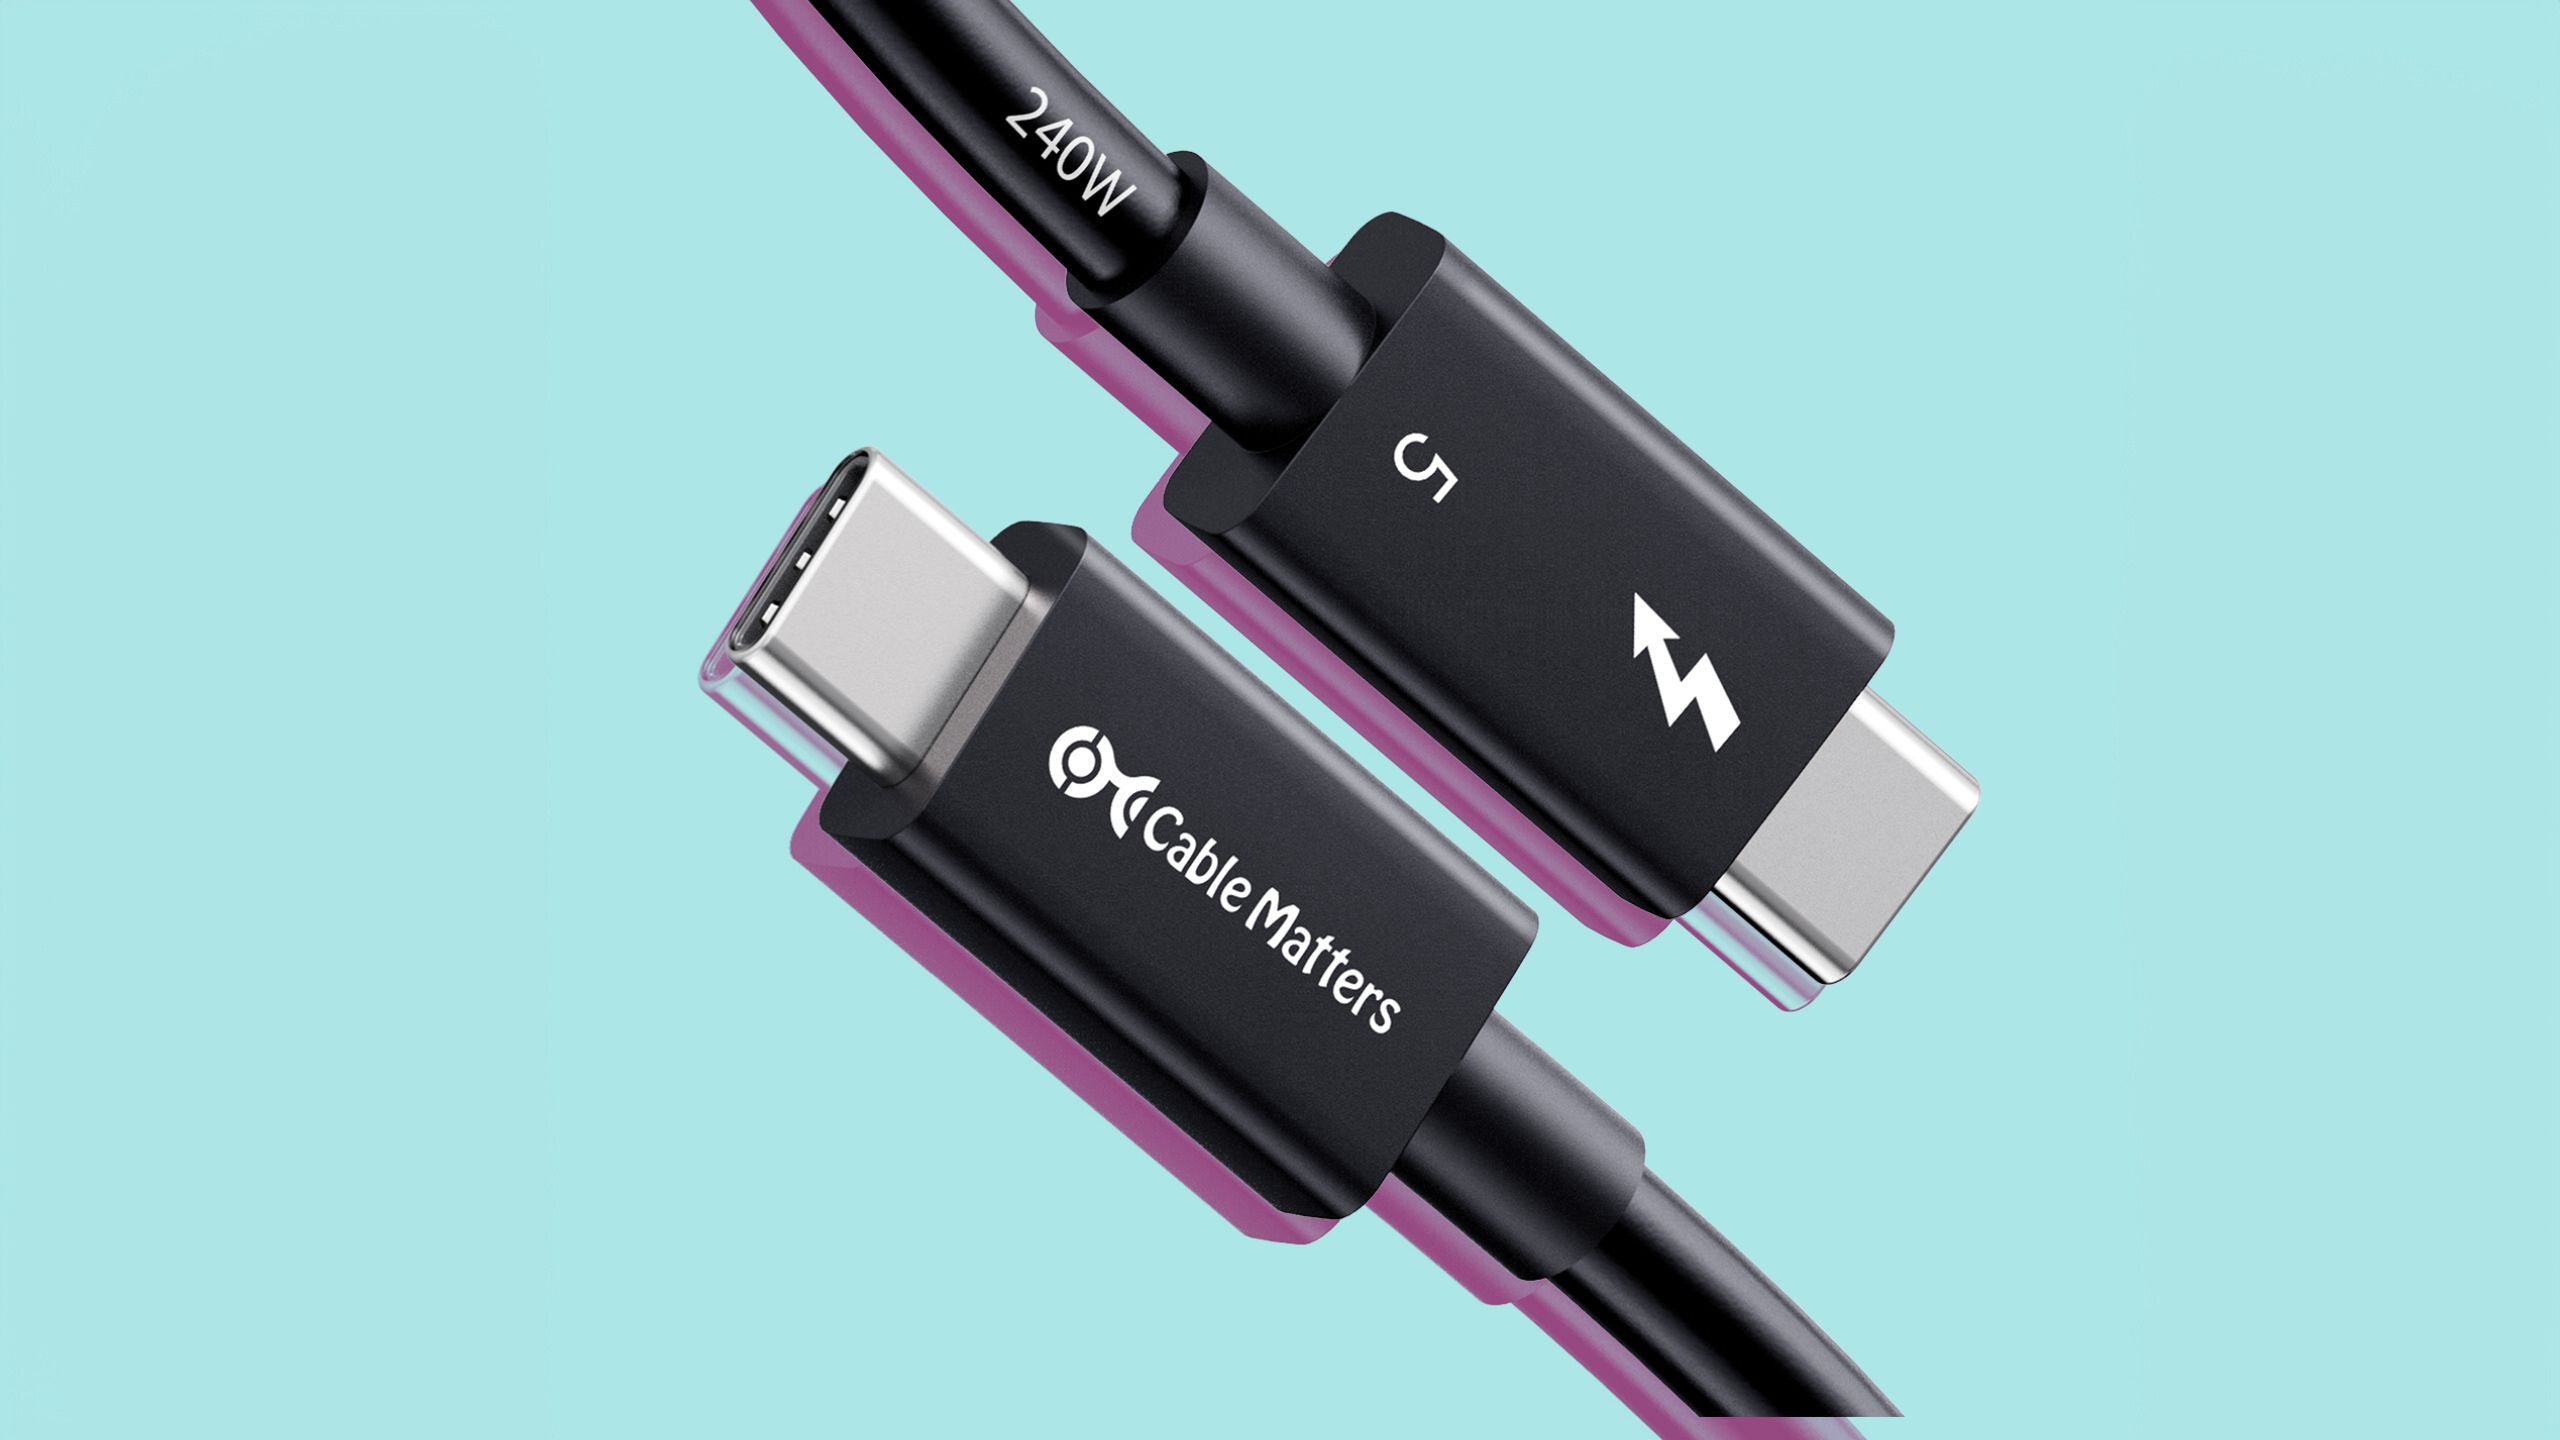 Thunderbolt 5 promises the best USB-C cables ever